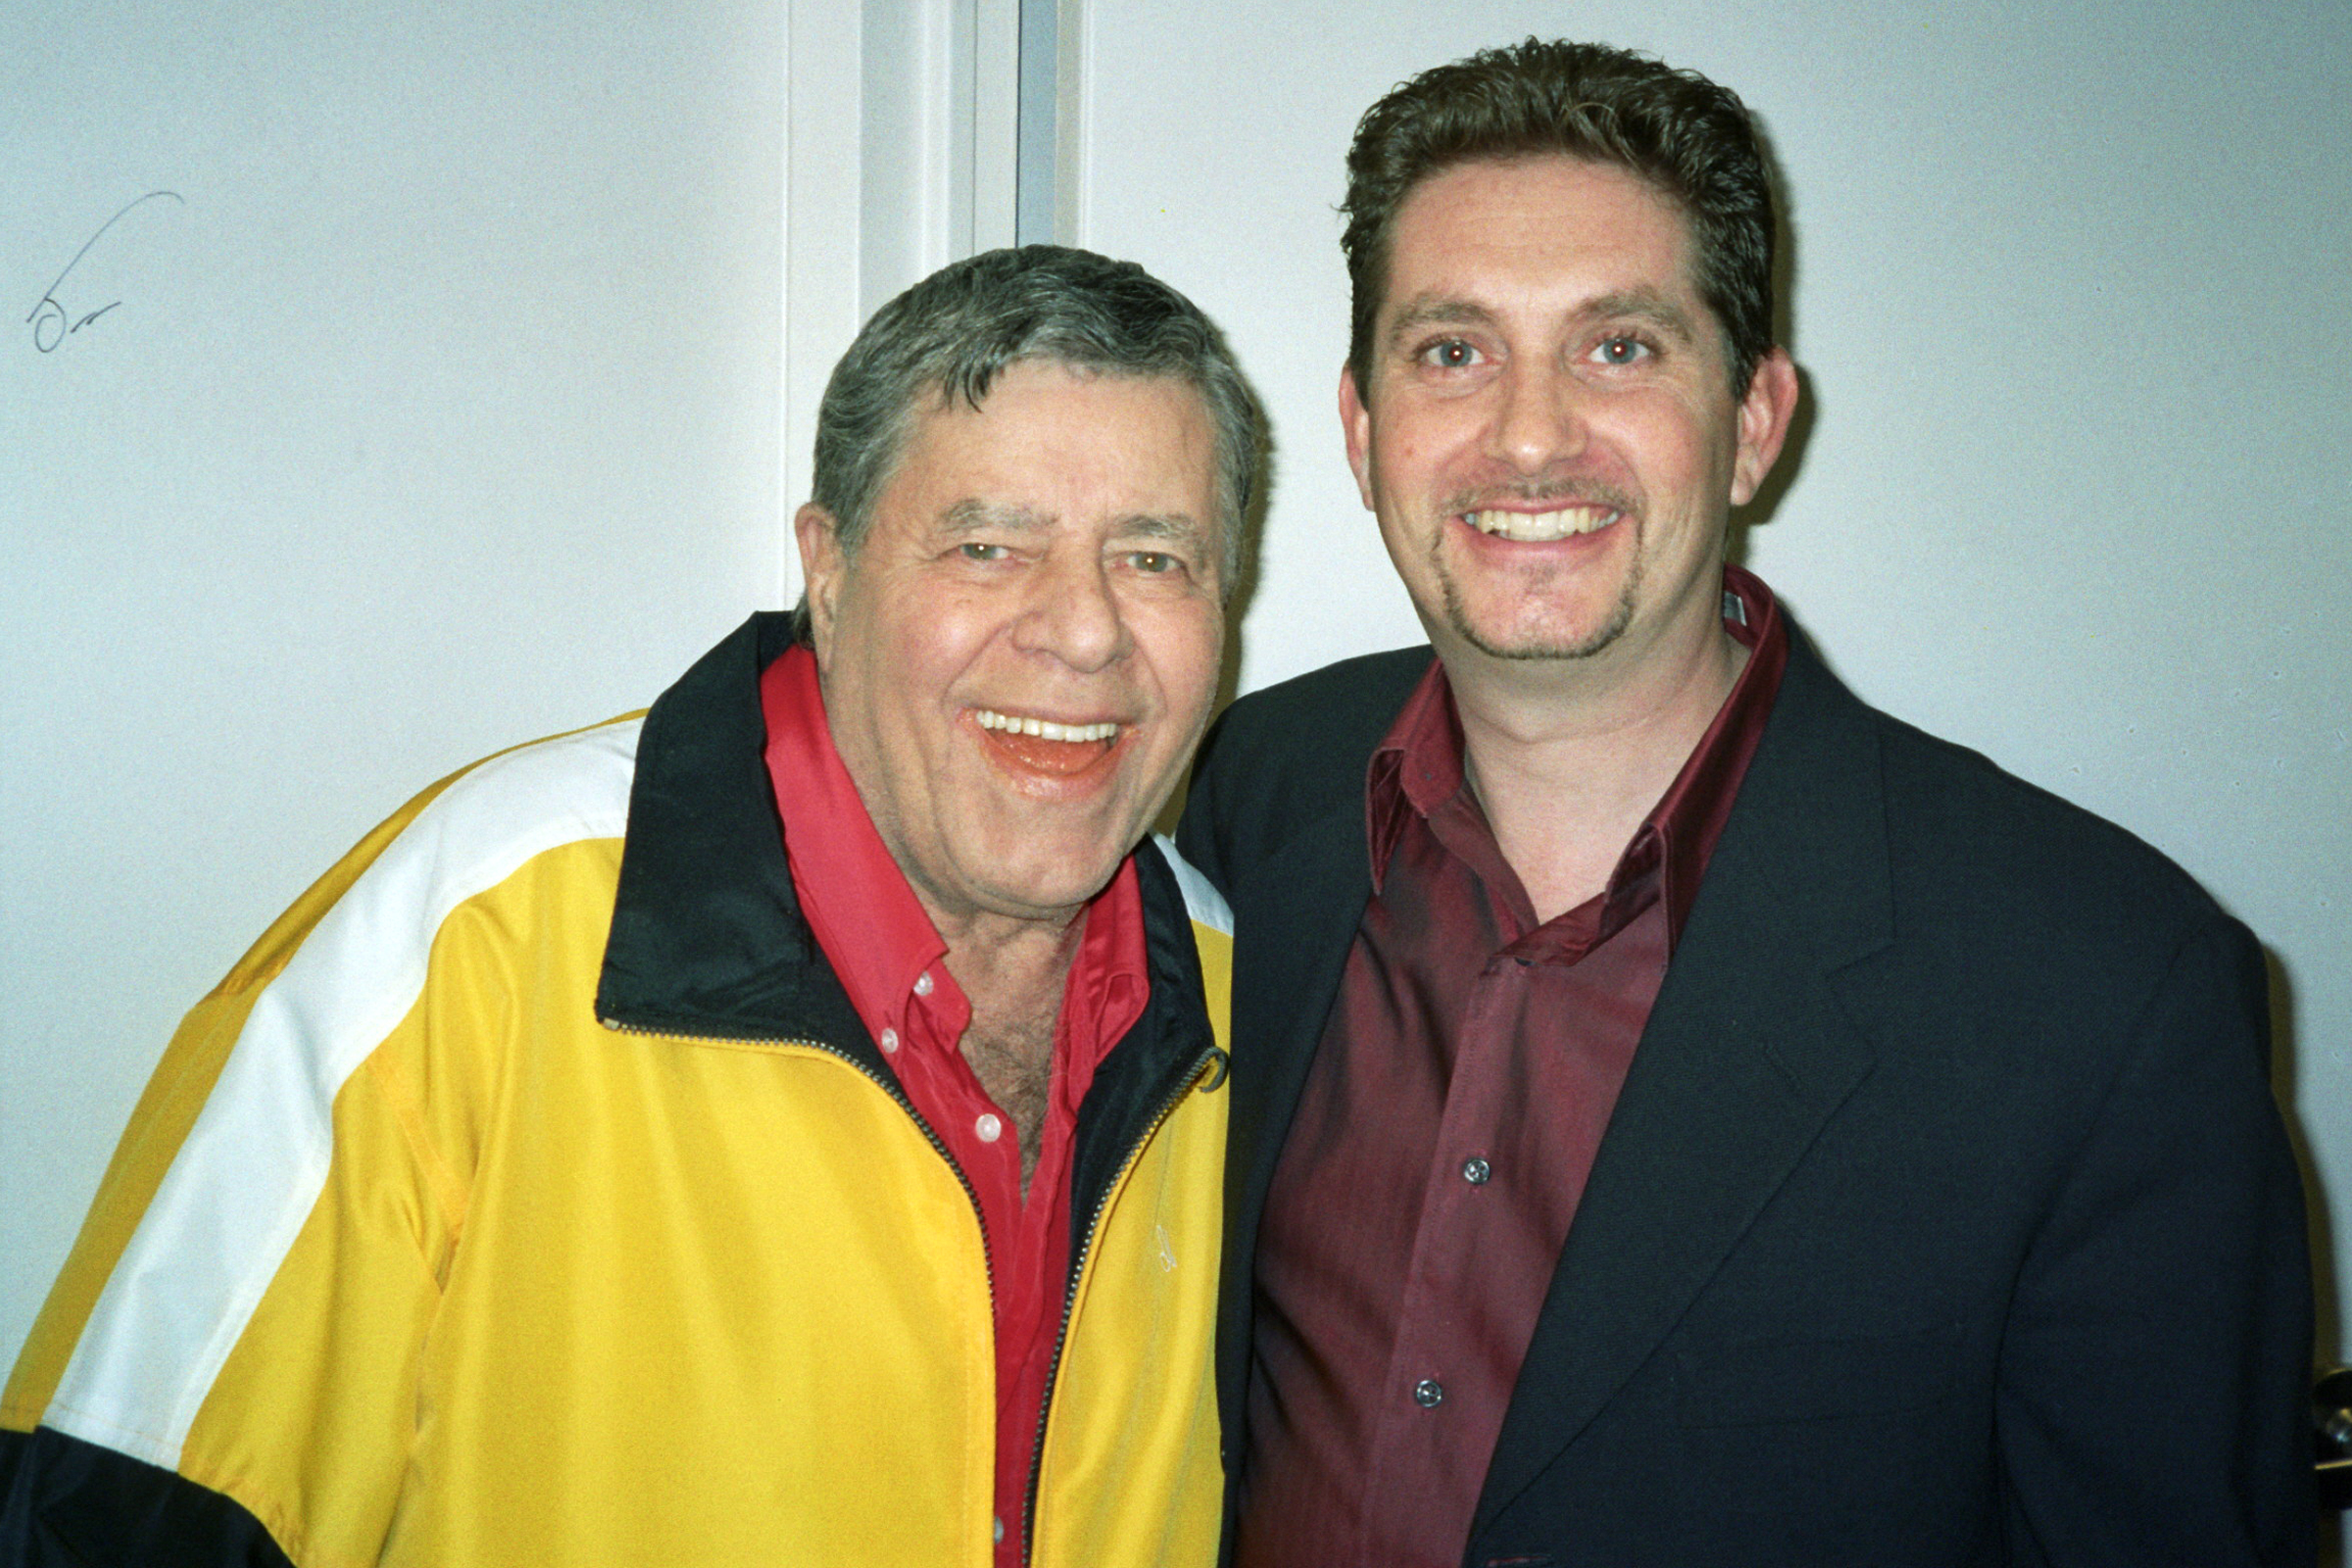 The King of Comedy Jerry Lewis and actor Michael Christaldi backstage at the David Letterman Show.